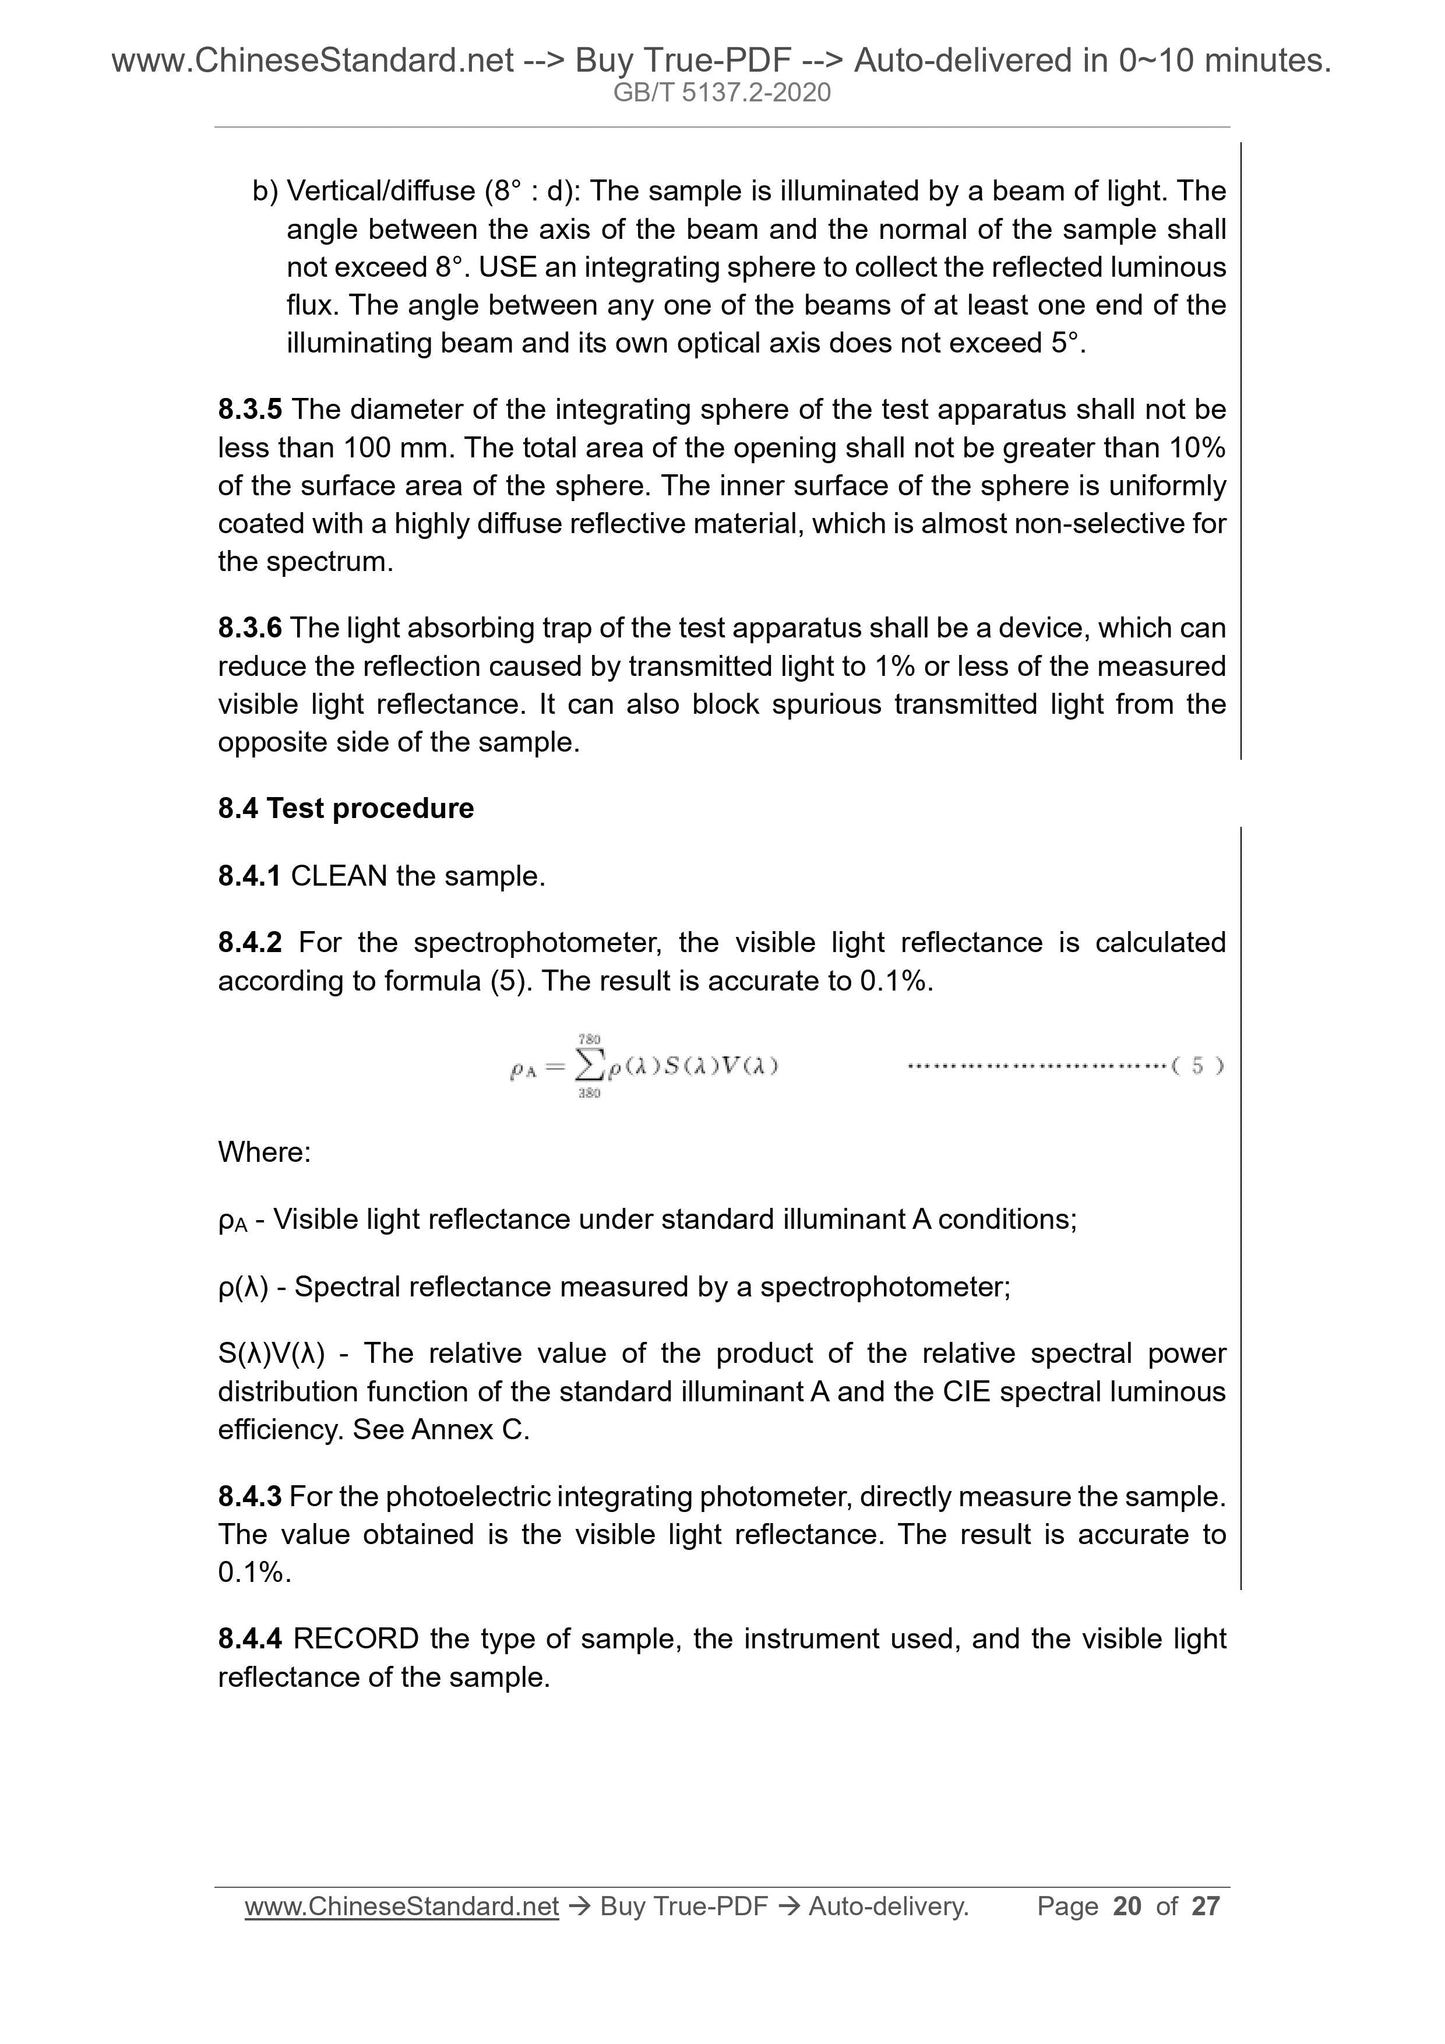 GB/T 5137.2-2020 Page 8